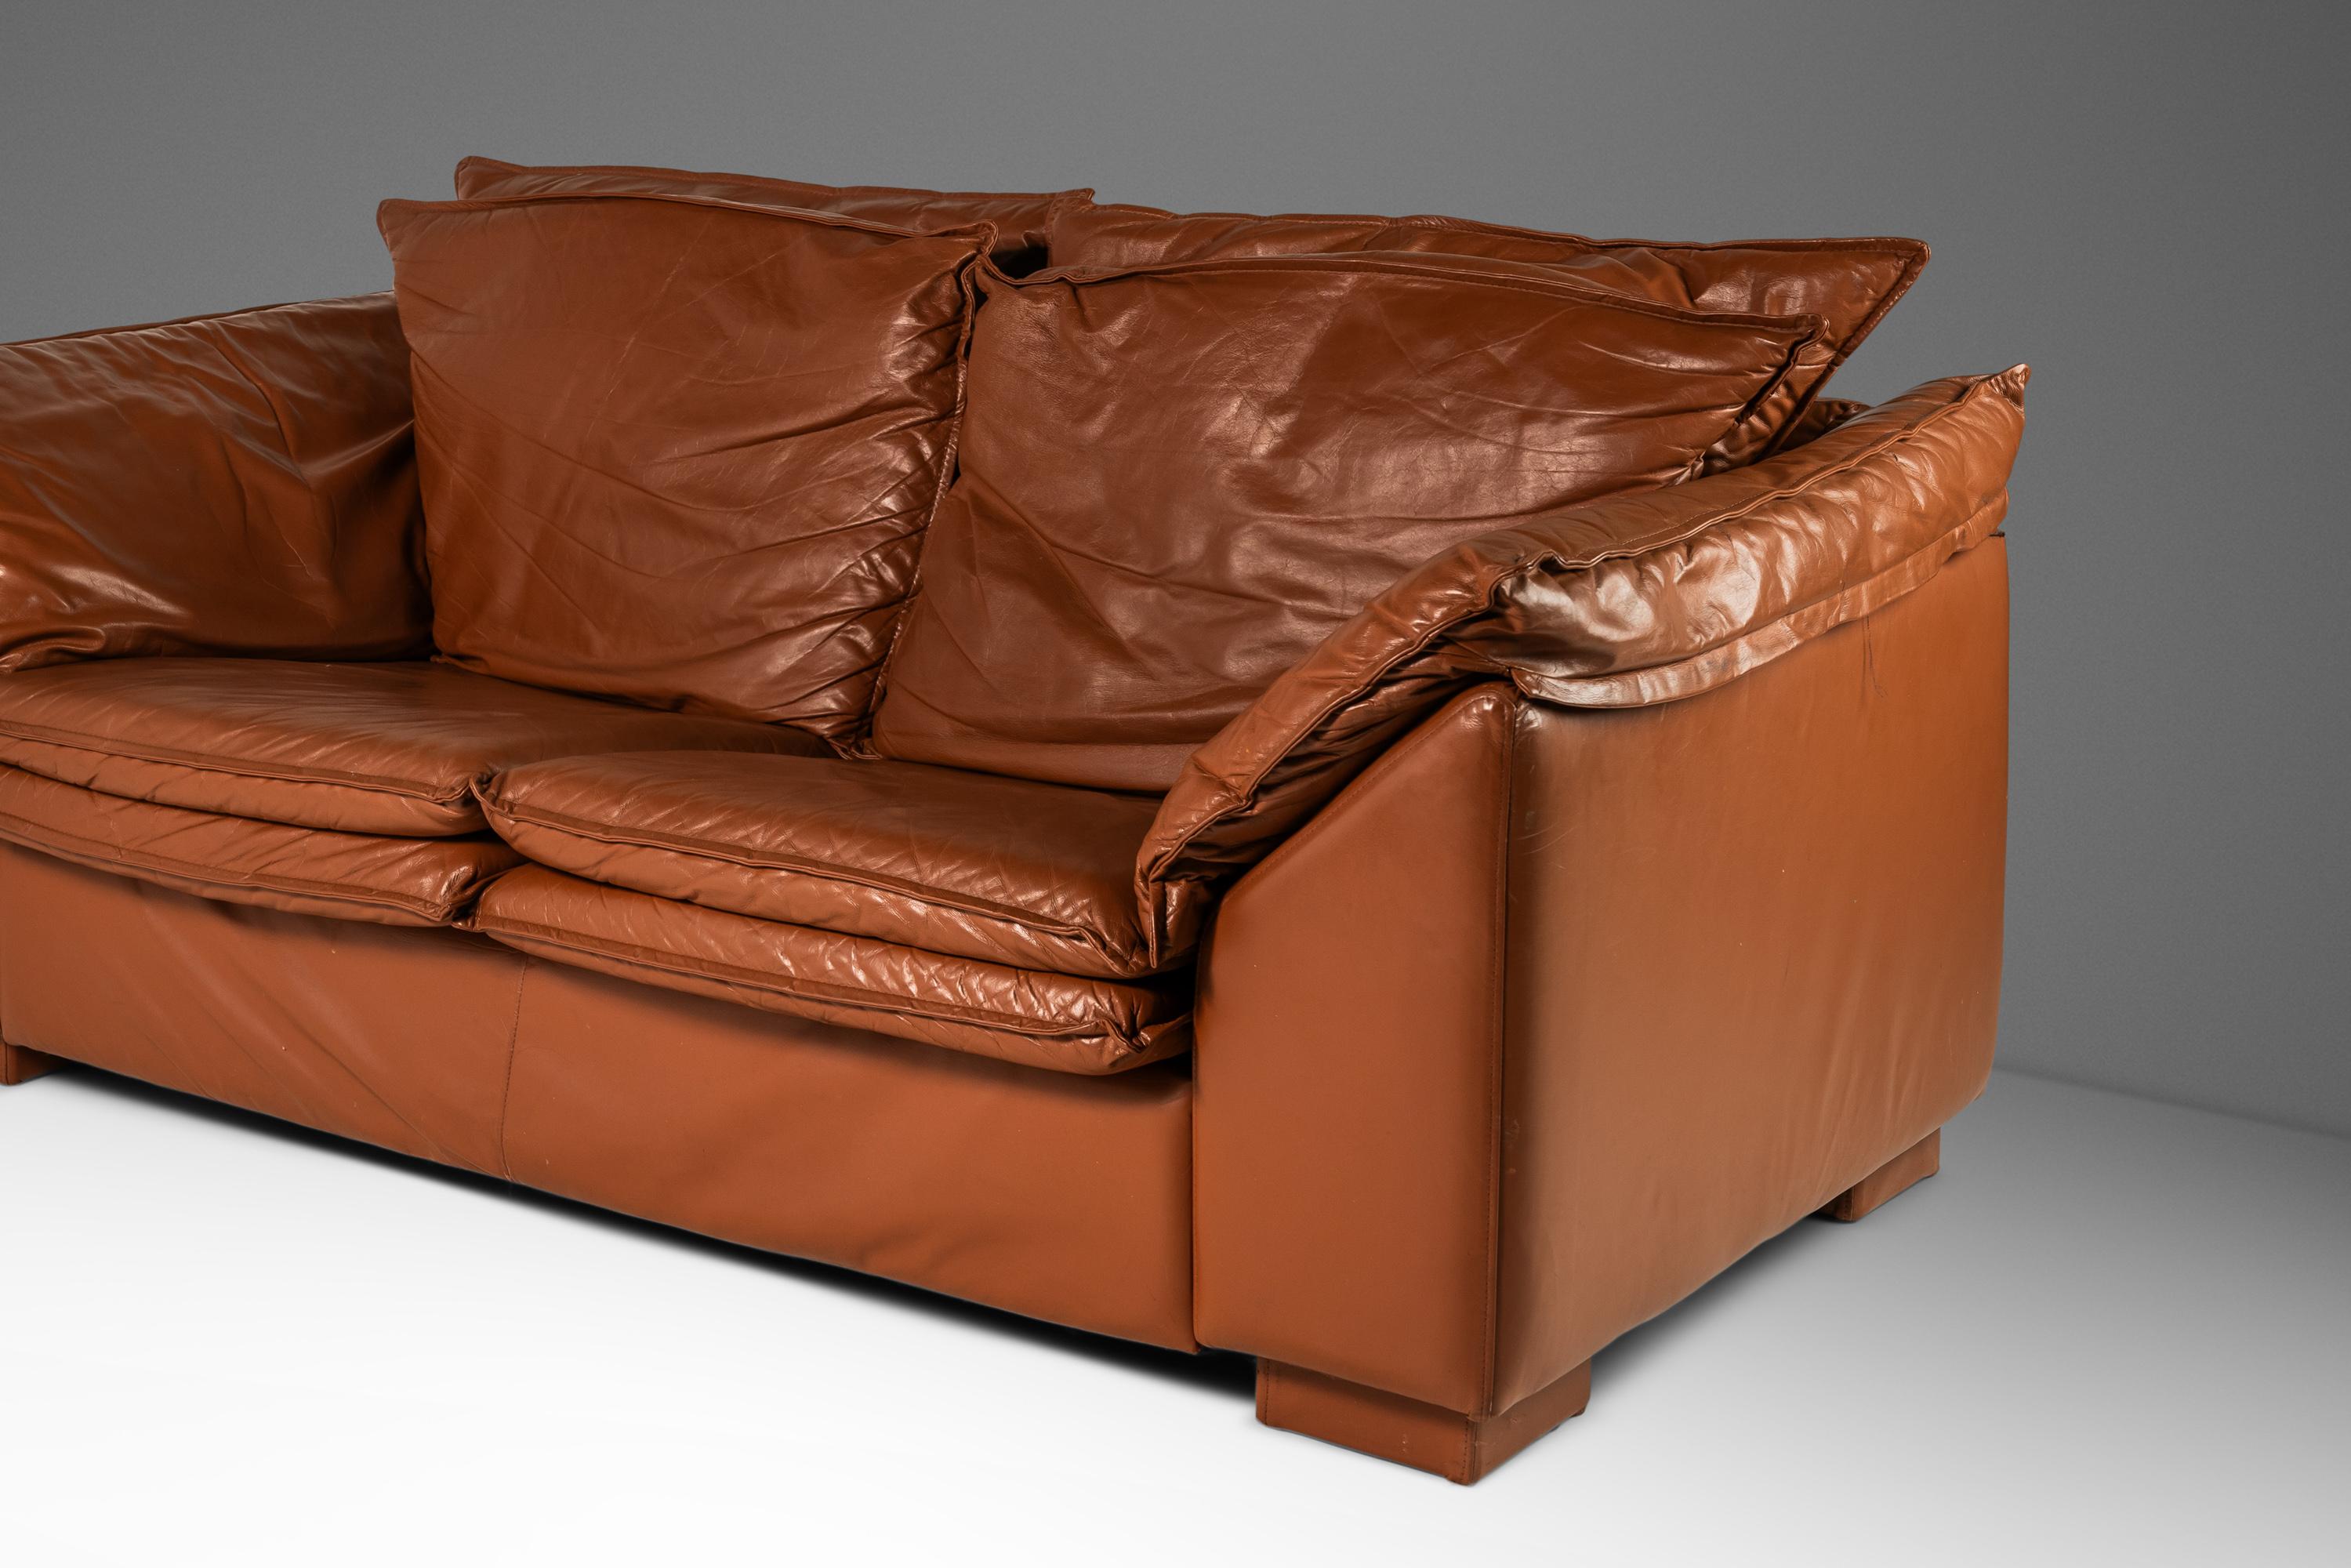 Low Profile Loveseat Sofa in Leather in the Manner of Niels Eilersen, c. 1980's For Sale 9